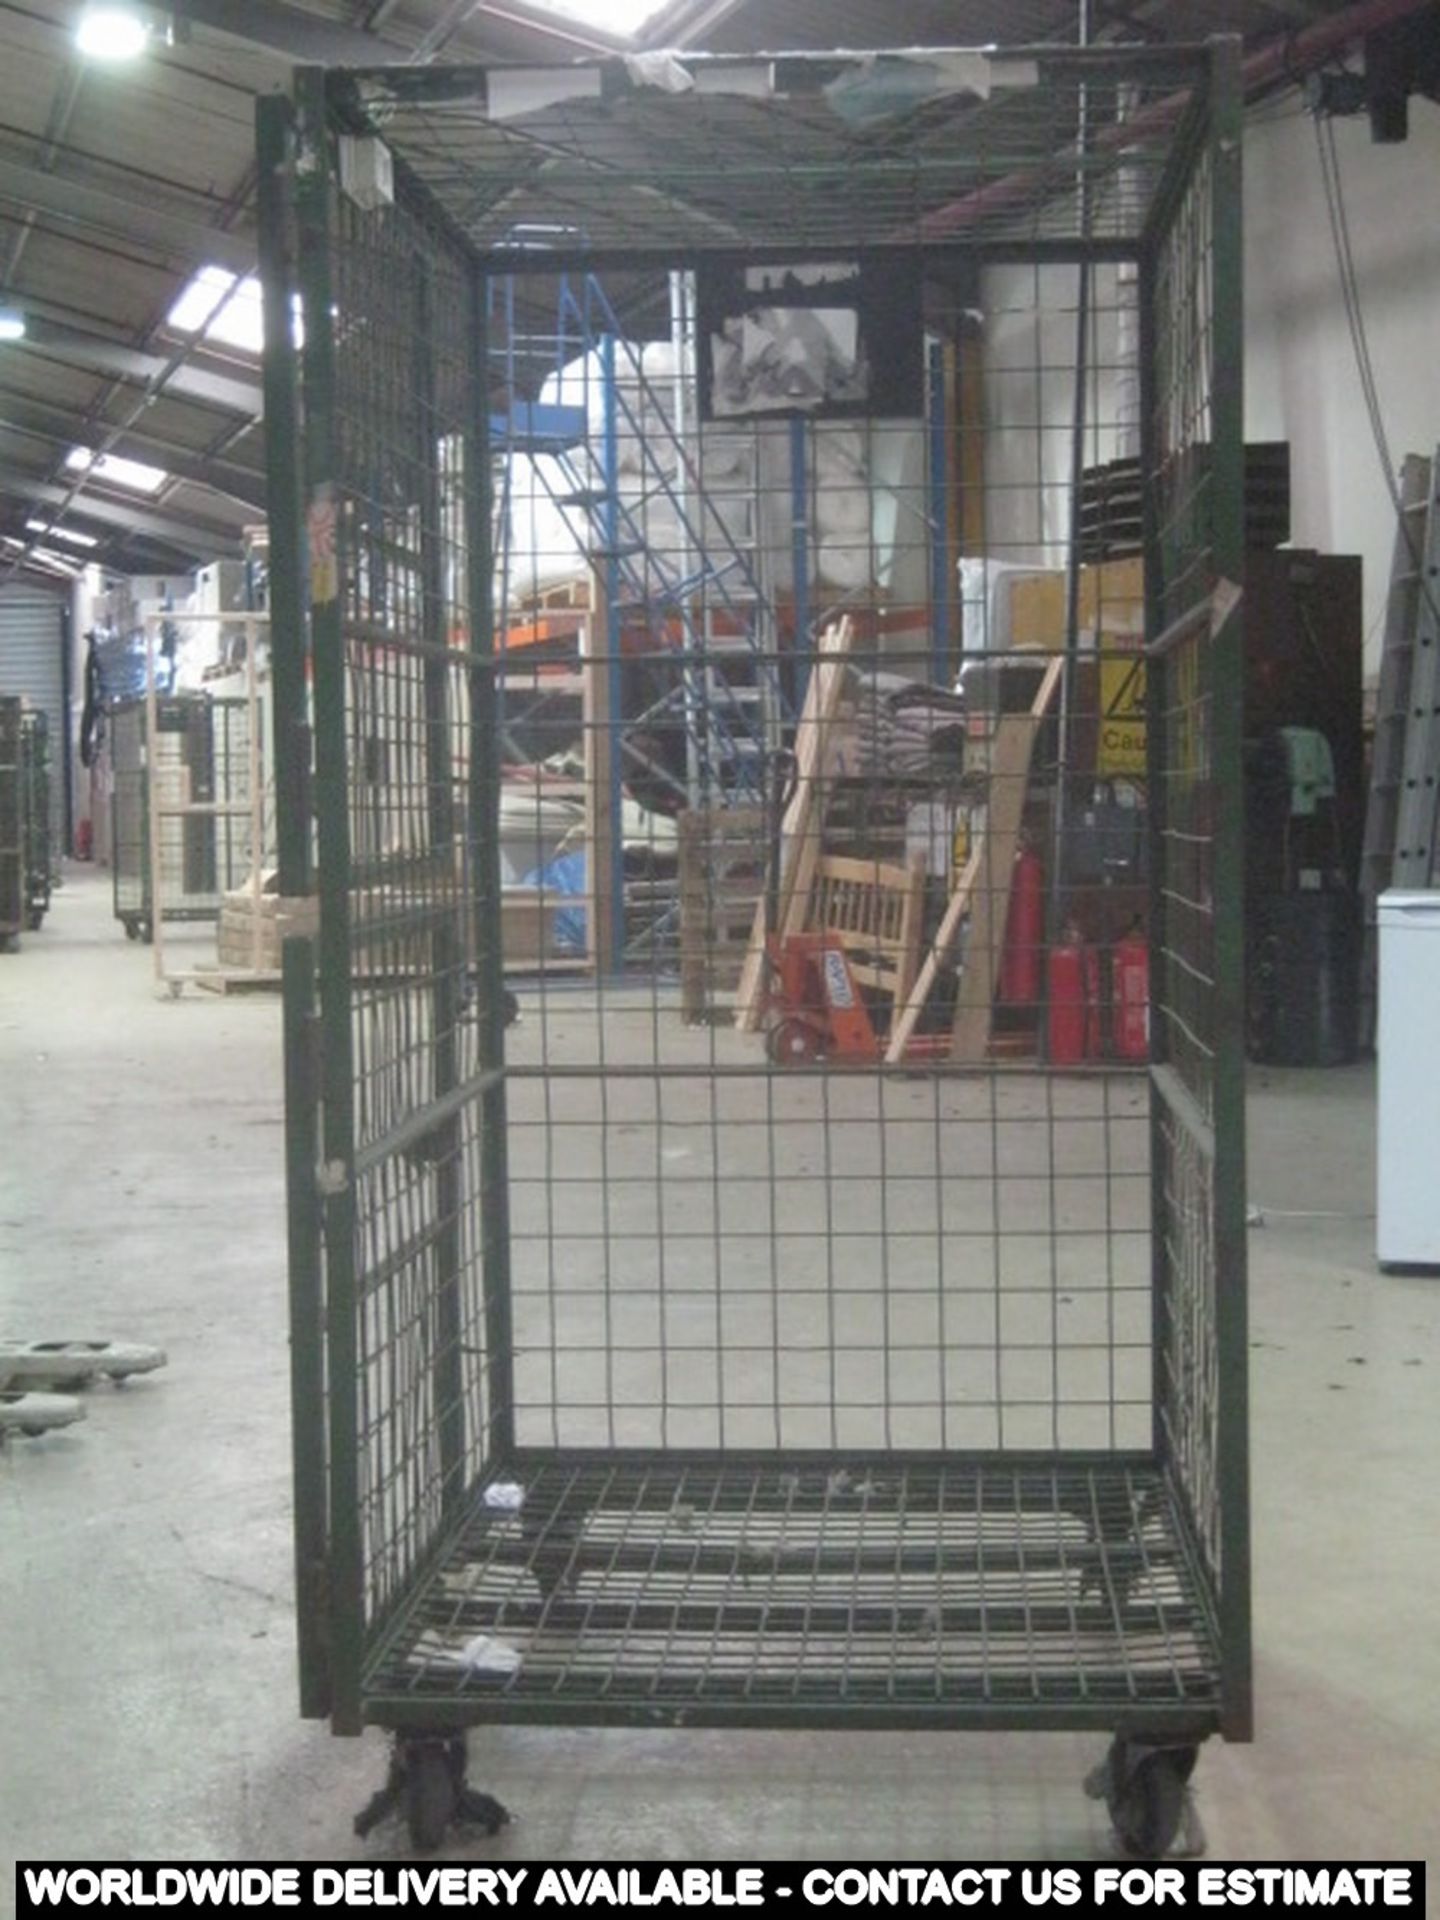 Wire mesh four wheeled parcel cage - 90cms width x 107cms depth x 180cms height approximately